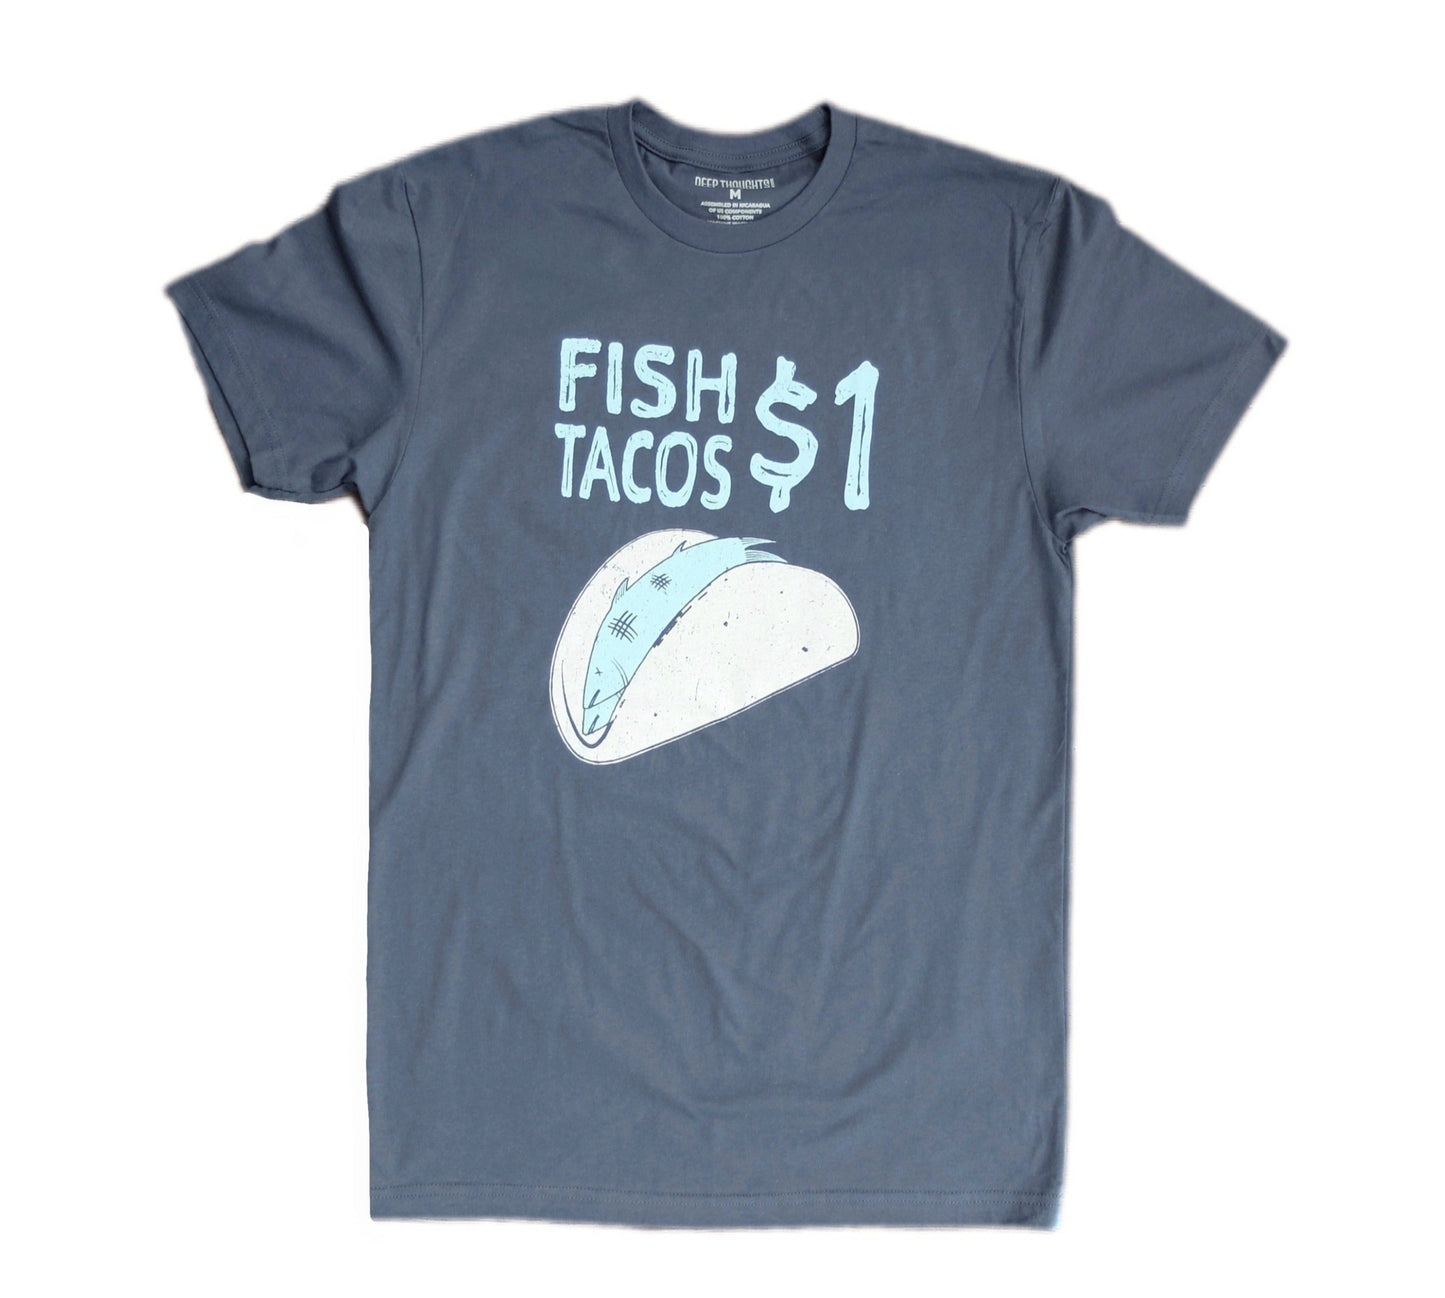 Indigo blue cotton t-shirt with funny $1 fish tacos graphic showing two dead fish inside a tortilla